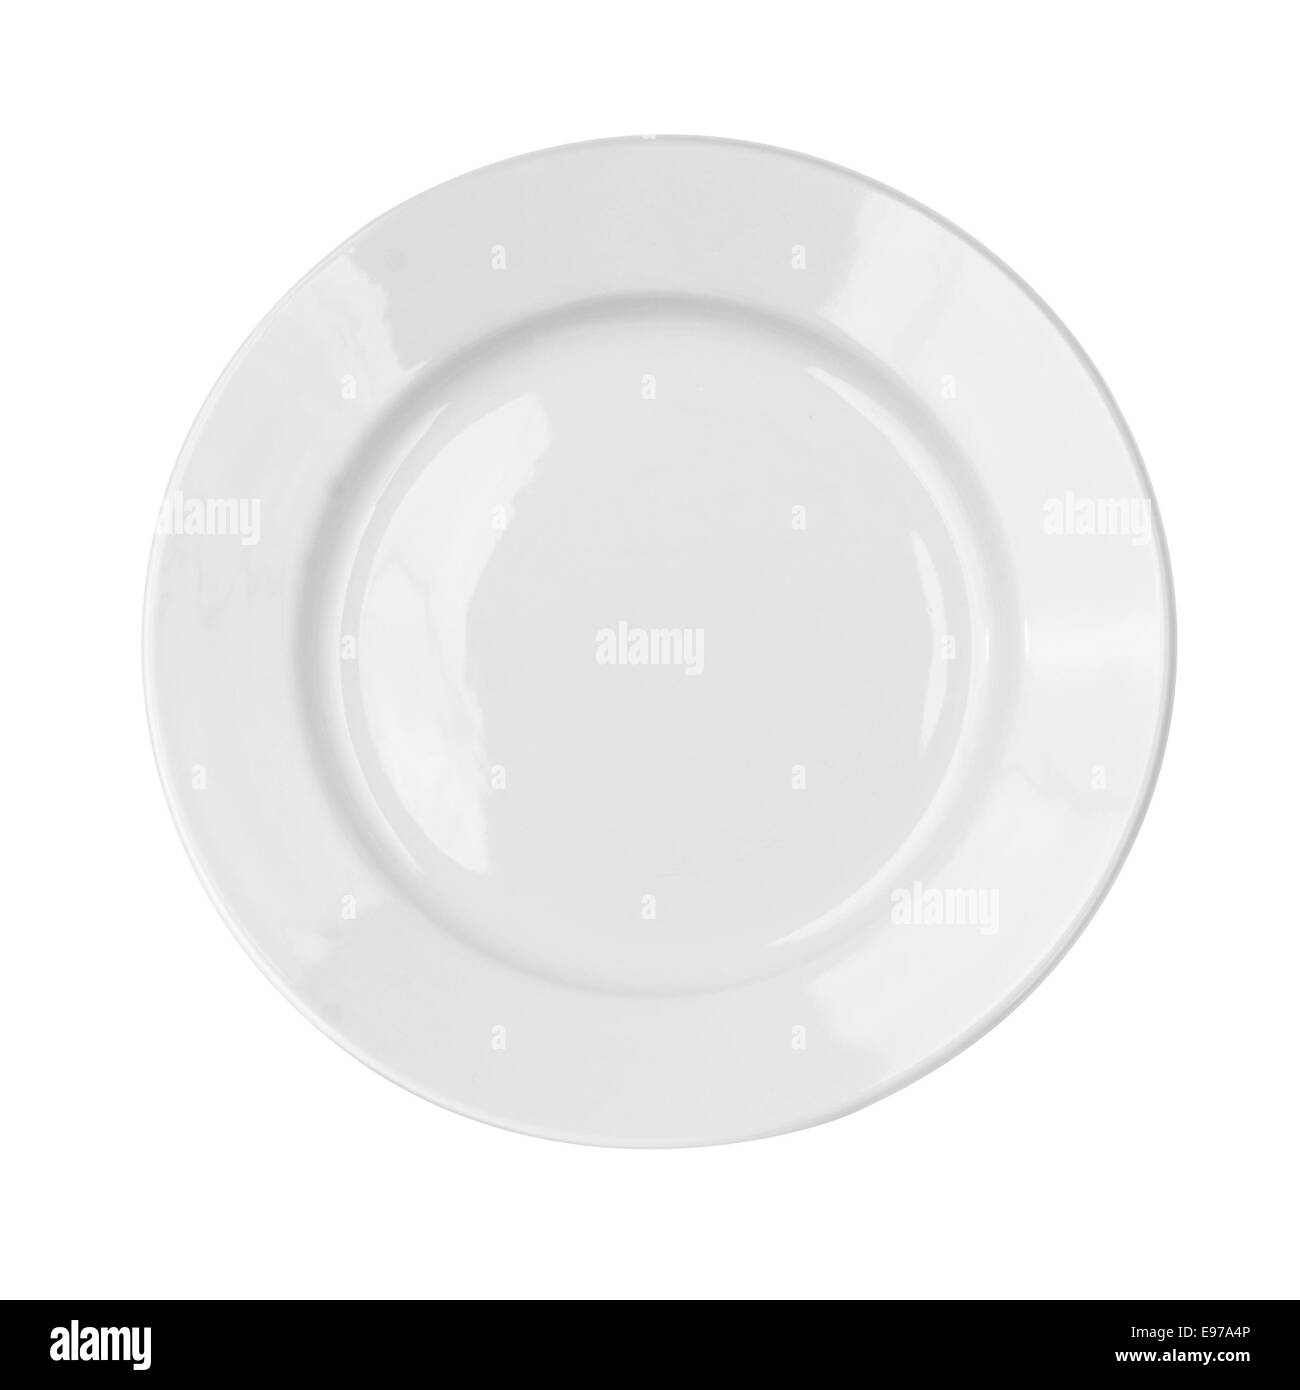 Empty white dish plate isolated with clipping path included Stock Photo